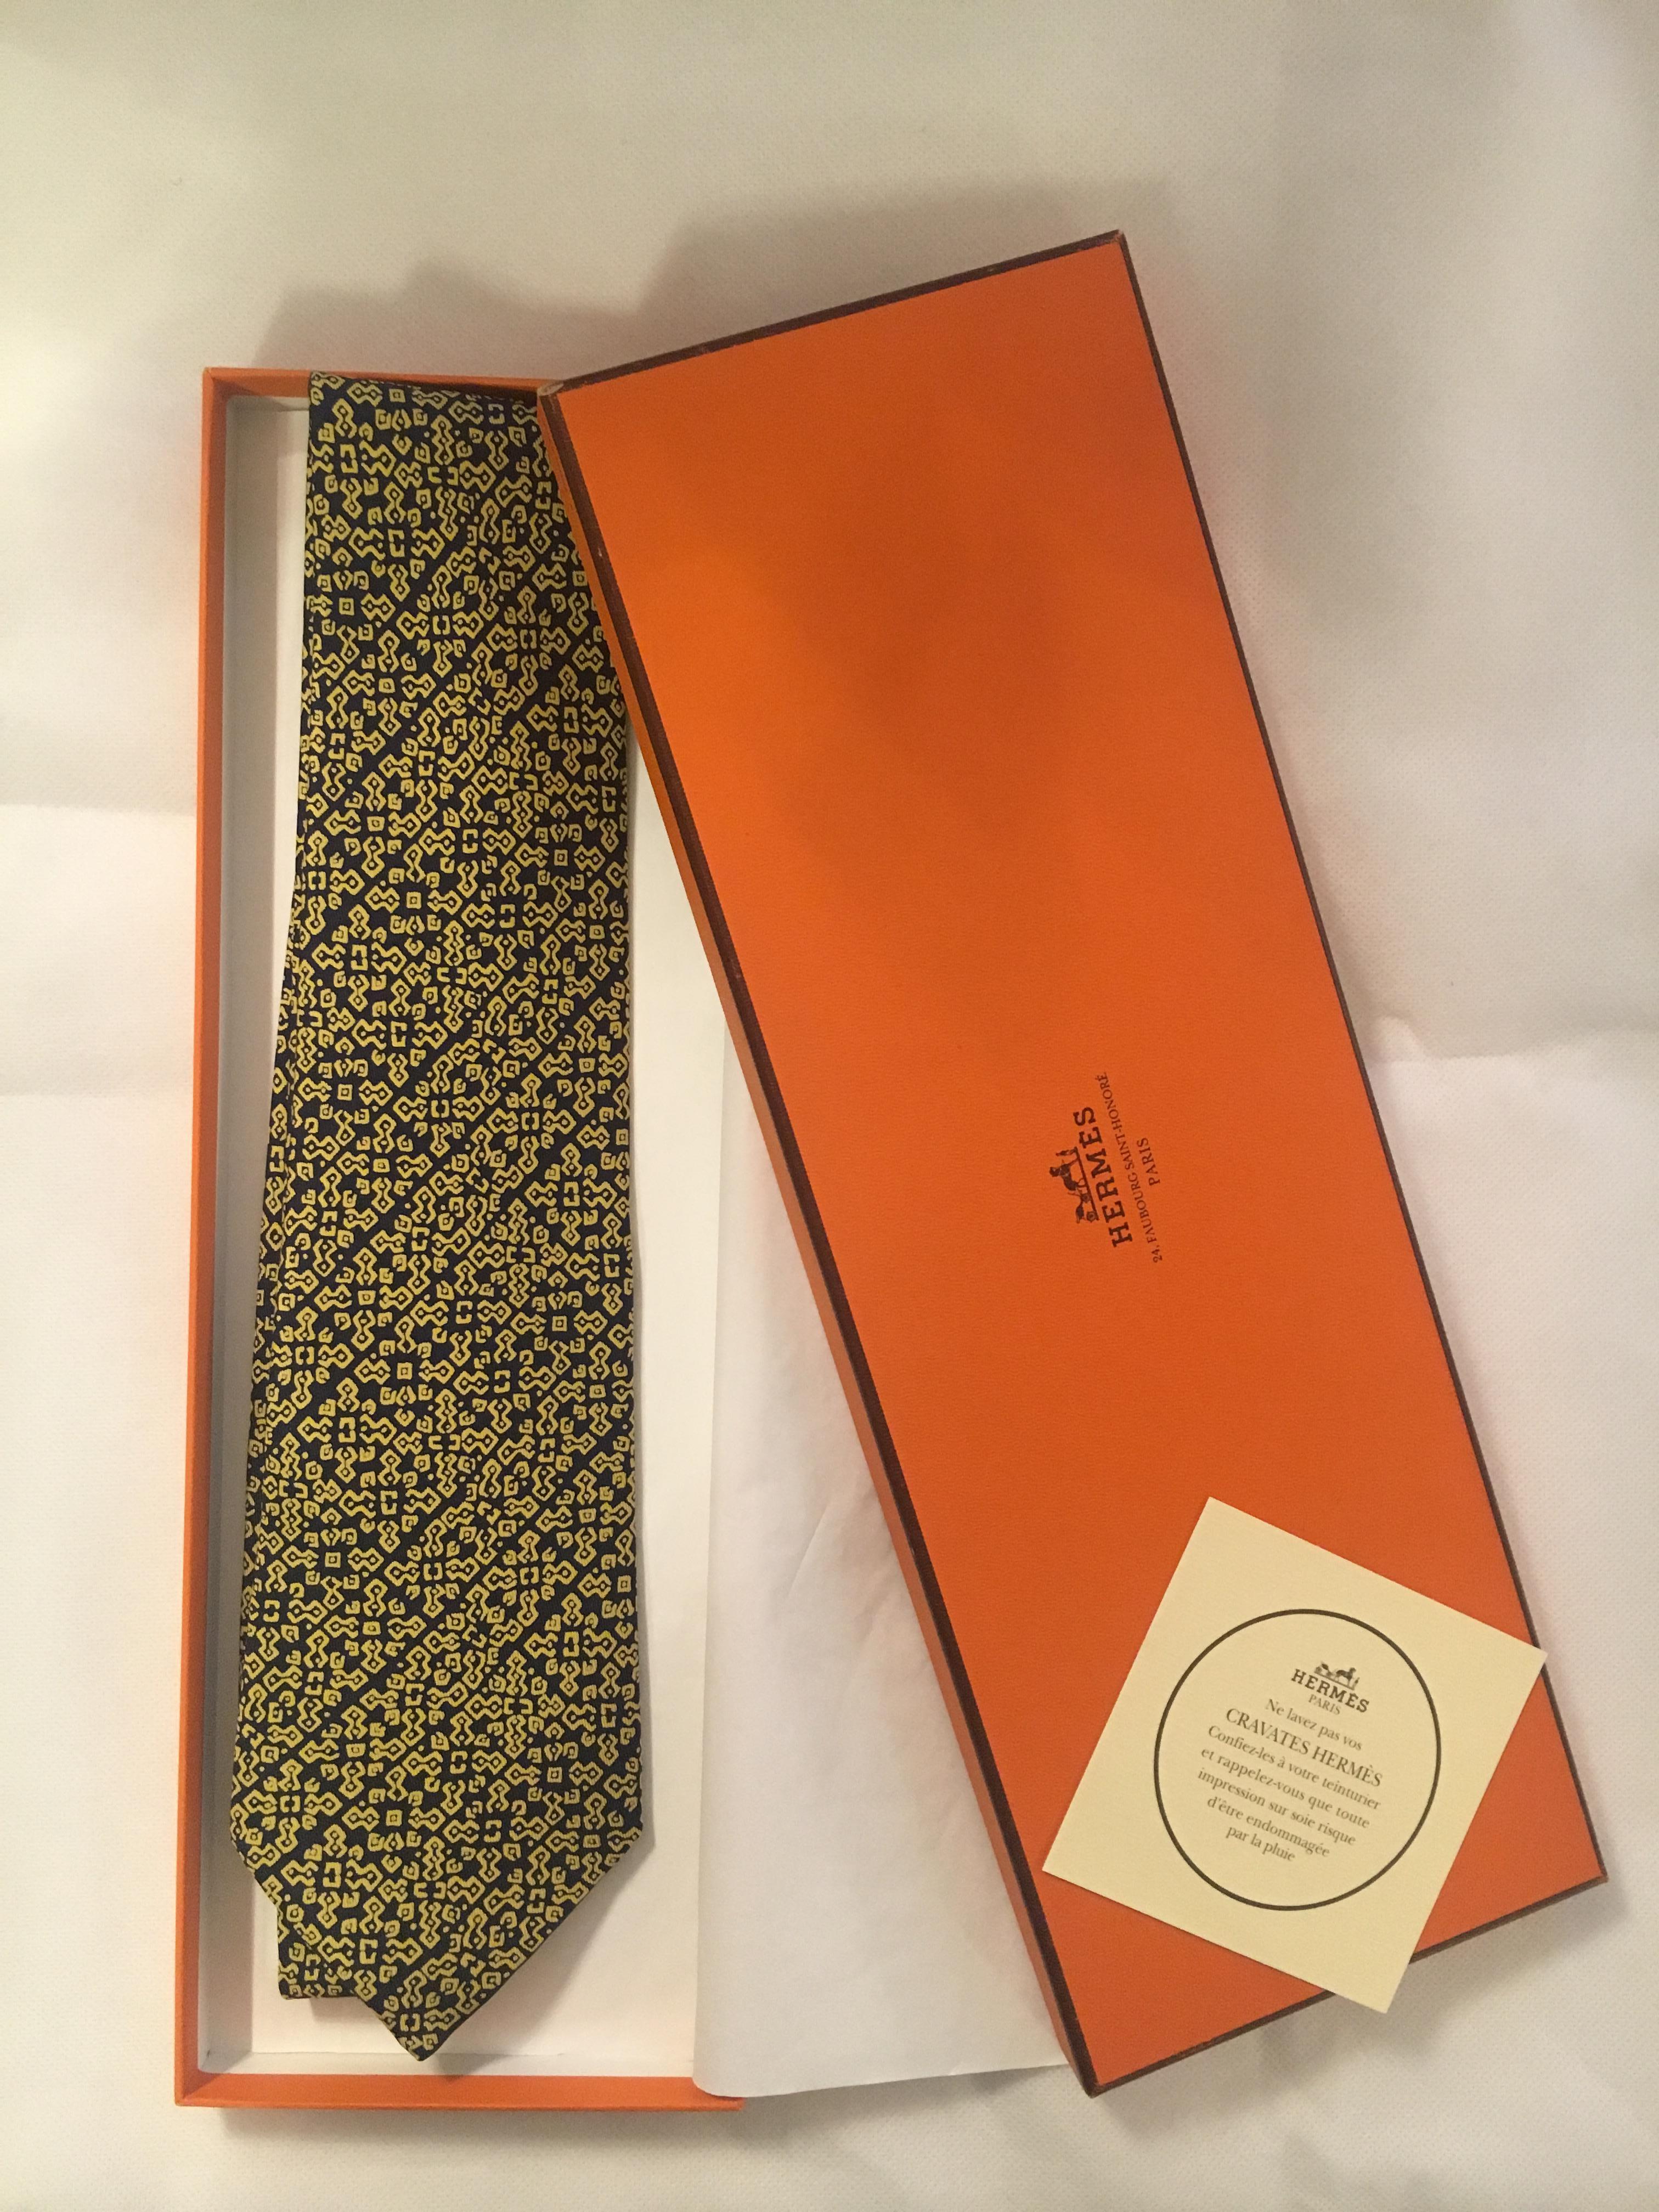 Beautiful HERMES tie in black / gold printed silk with geometric patterns, mint condition!

Beautiful HERMES tie
Dominant colors: Black & Gold
Reason: Geometric
Material: 100% Silk
Condition: new
Packaging: Original box